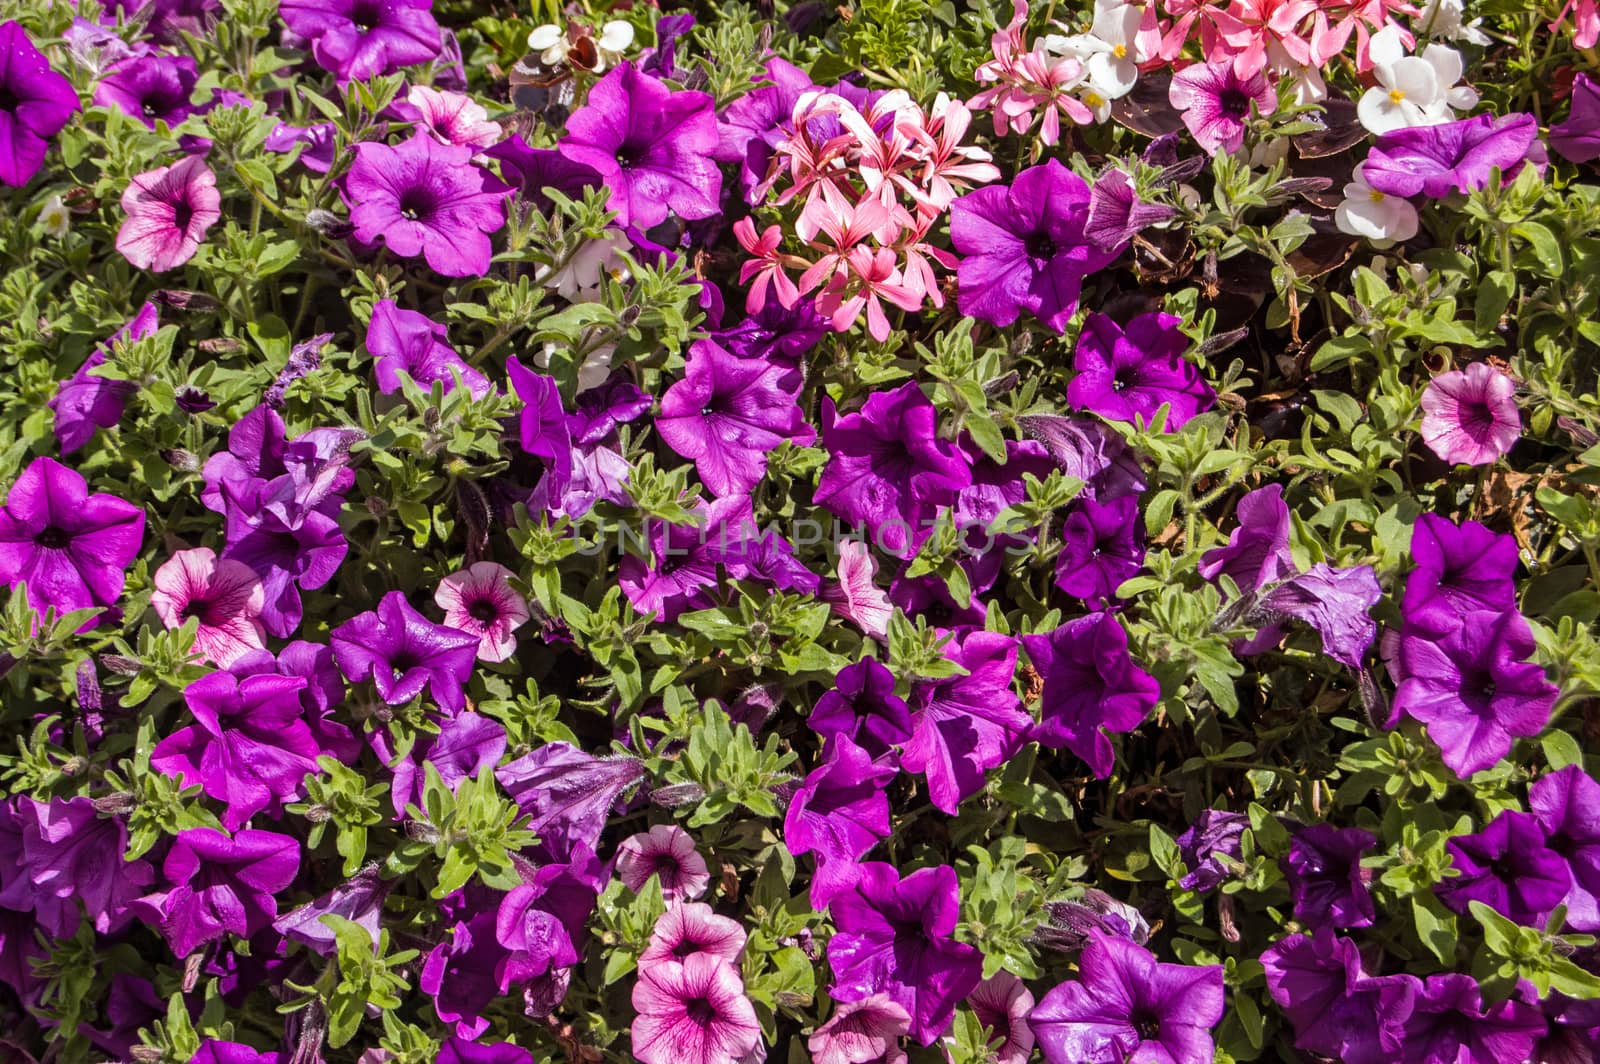 A closely planted flower bed of purple petunias with a few pink pelargoniums summer, England.